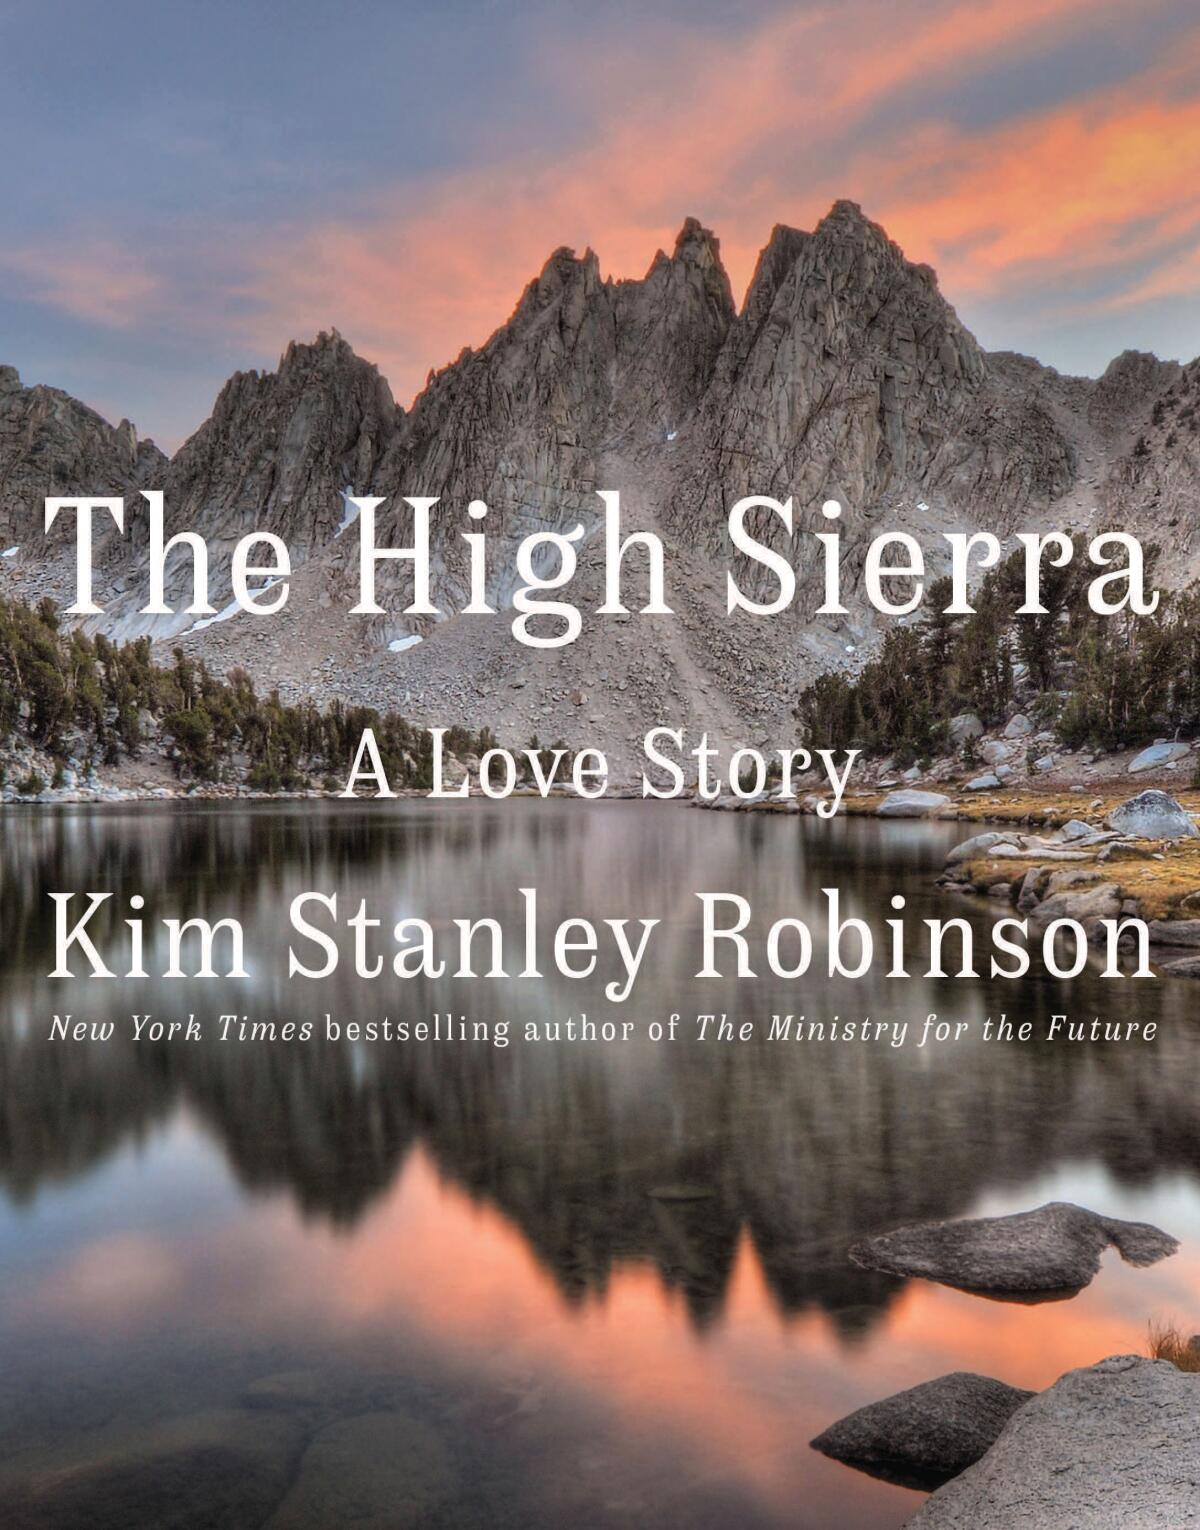 "The High Sierra: A Love Story" book cover mountains and a lake